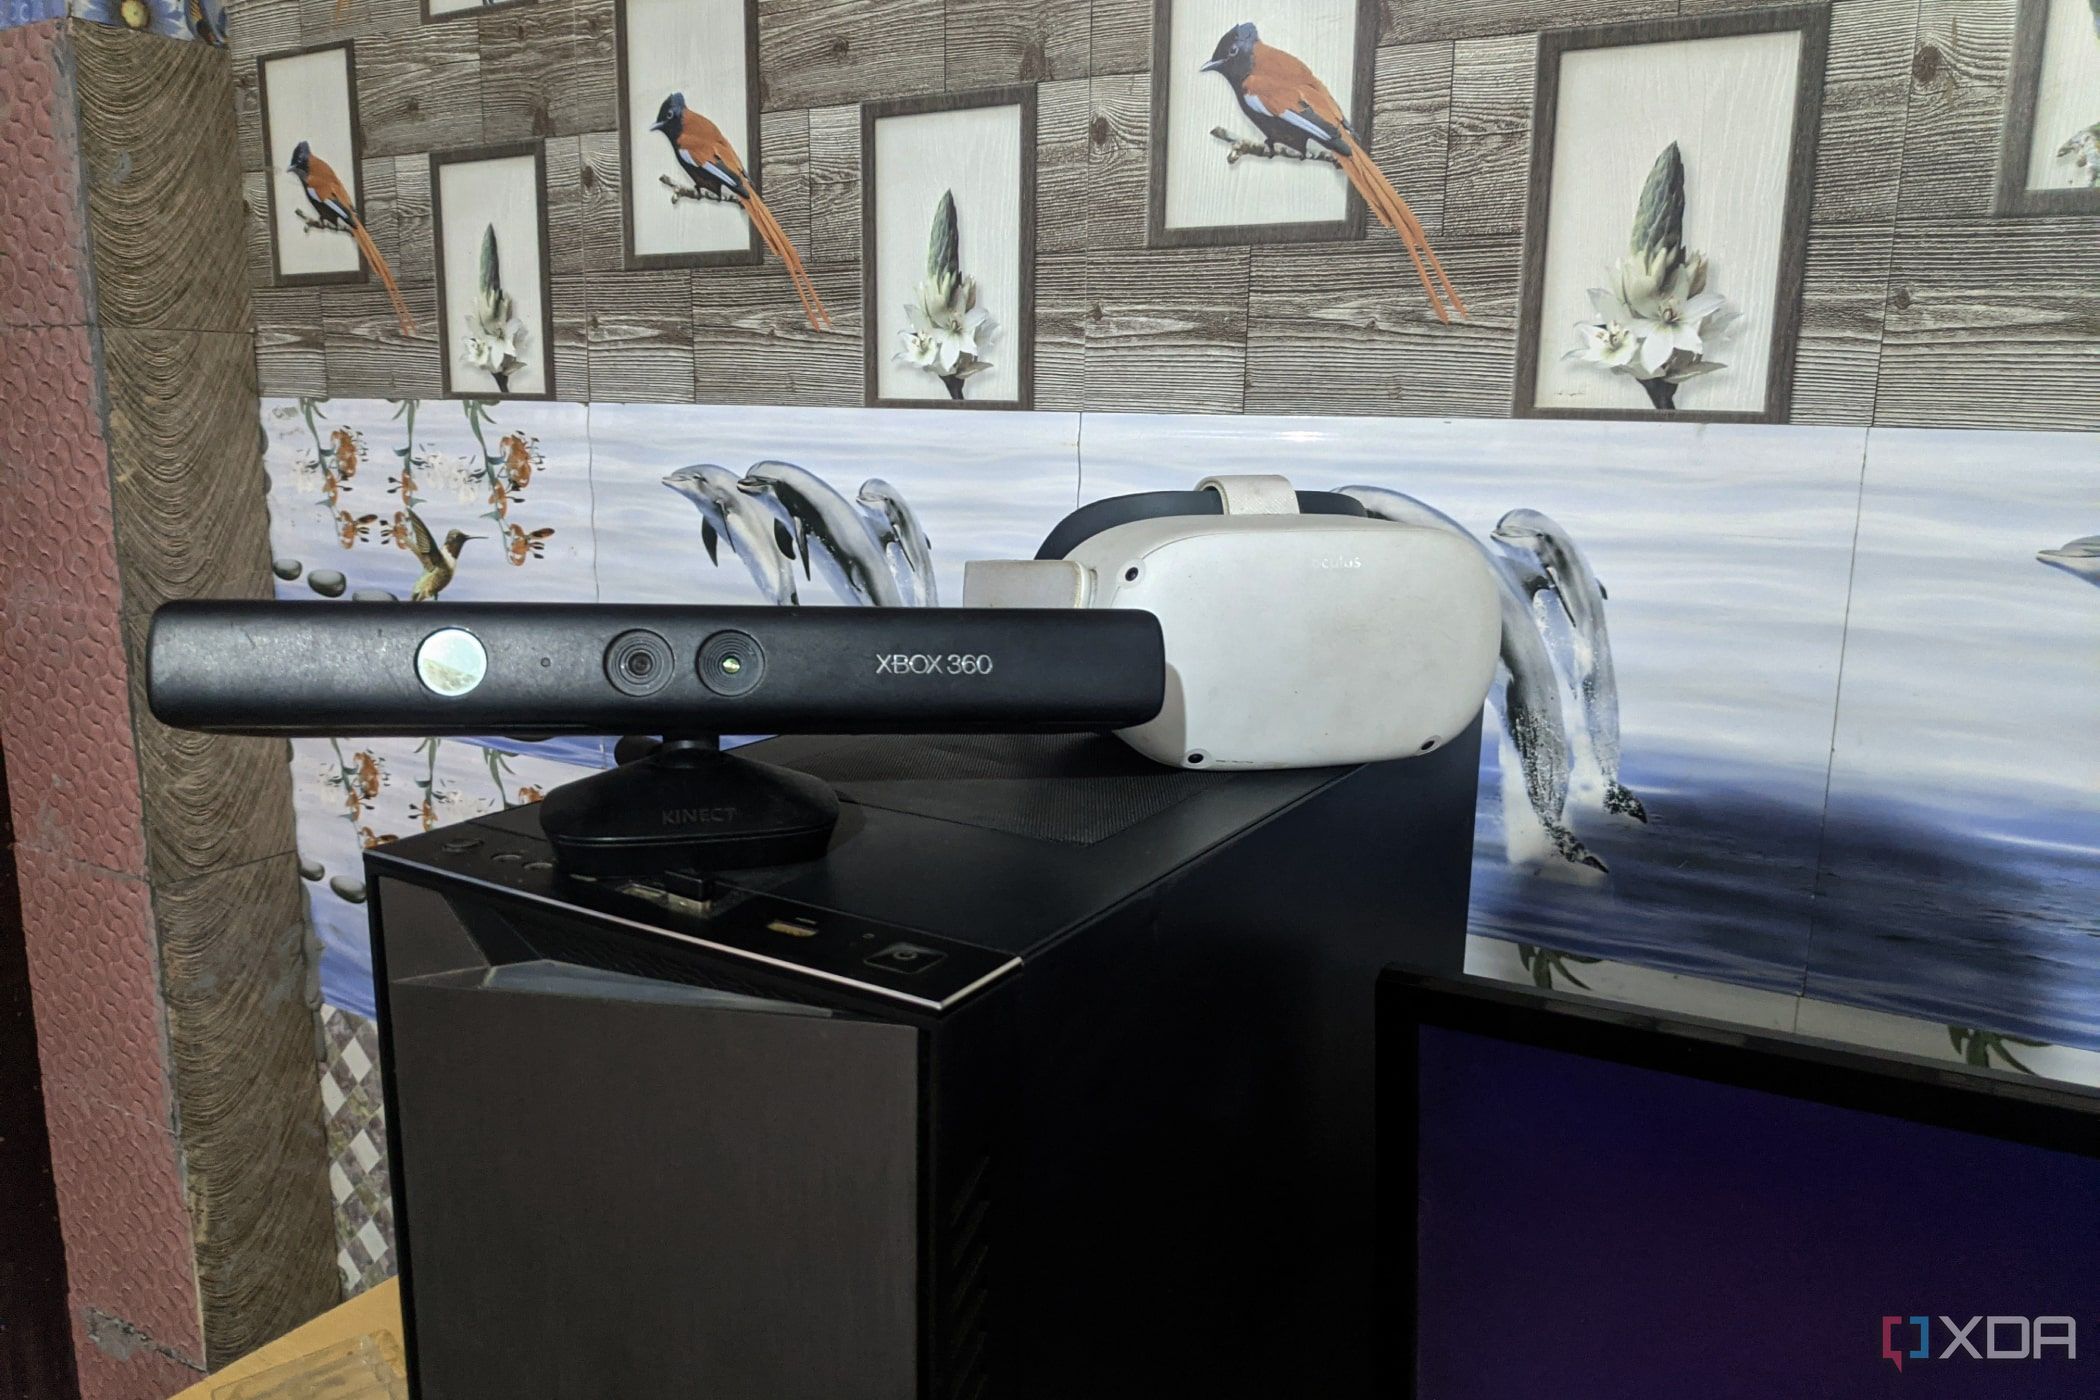 Can we finally admit that Kinect is dead?